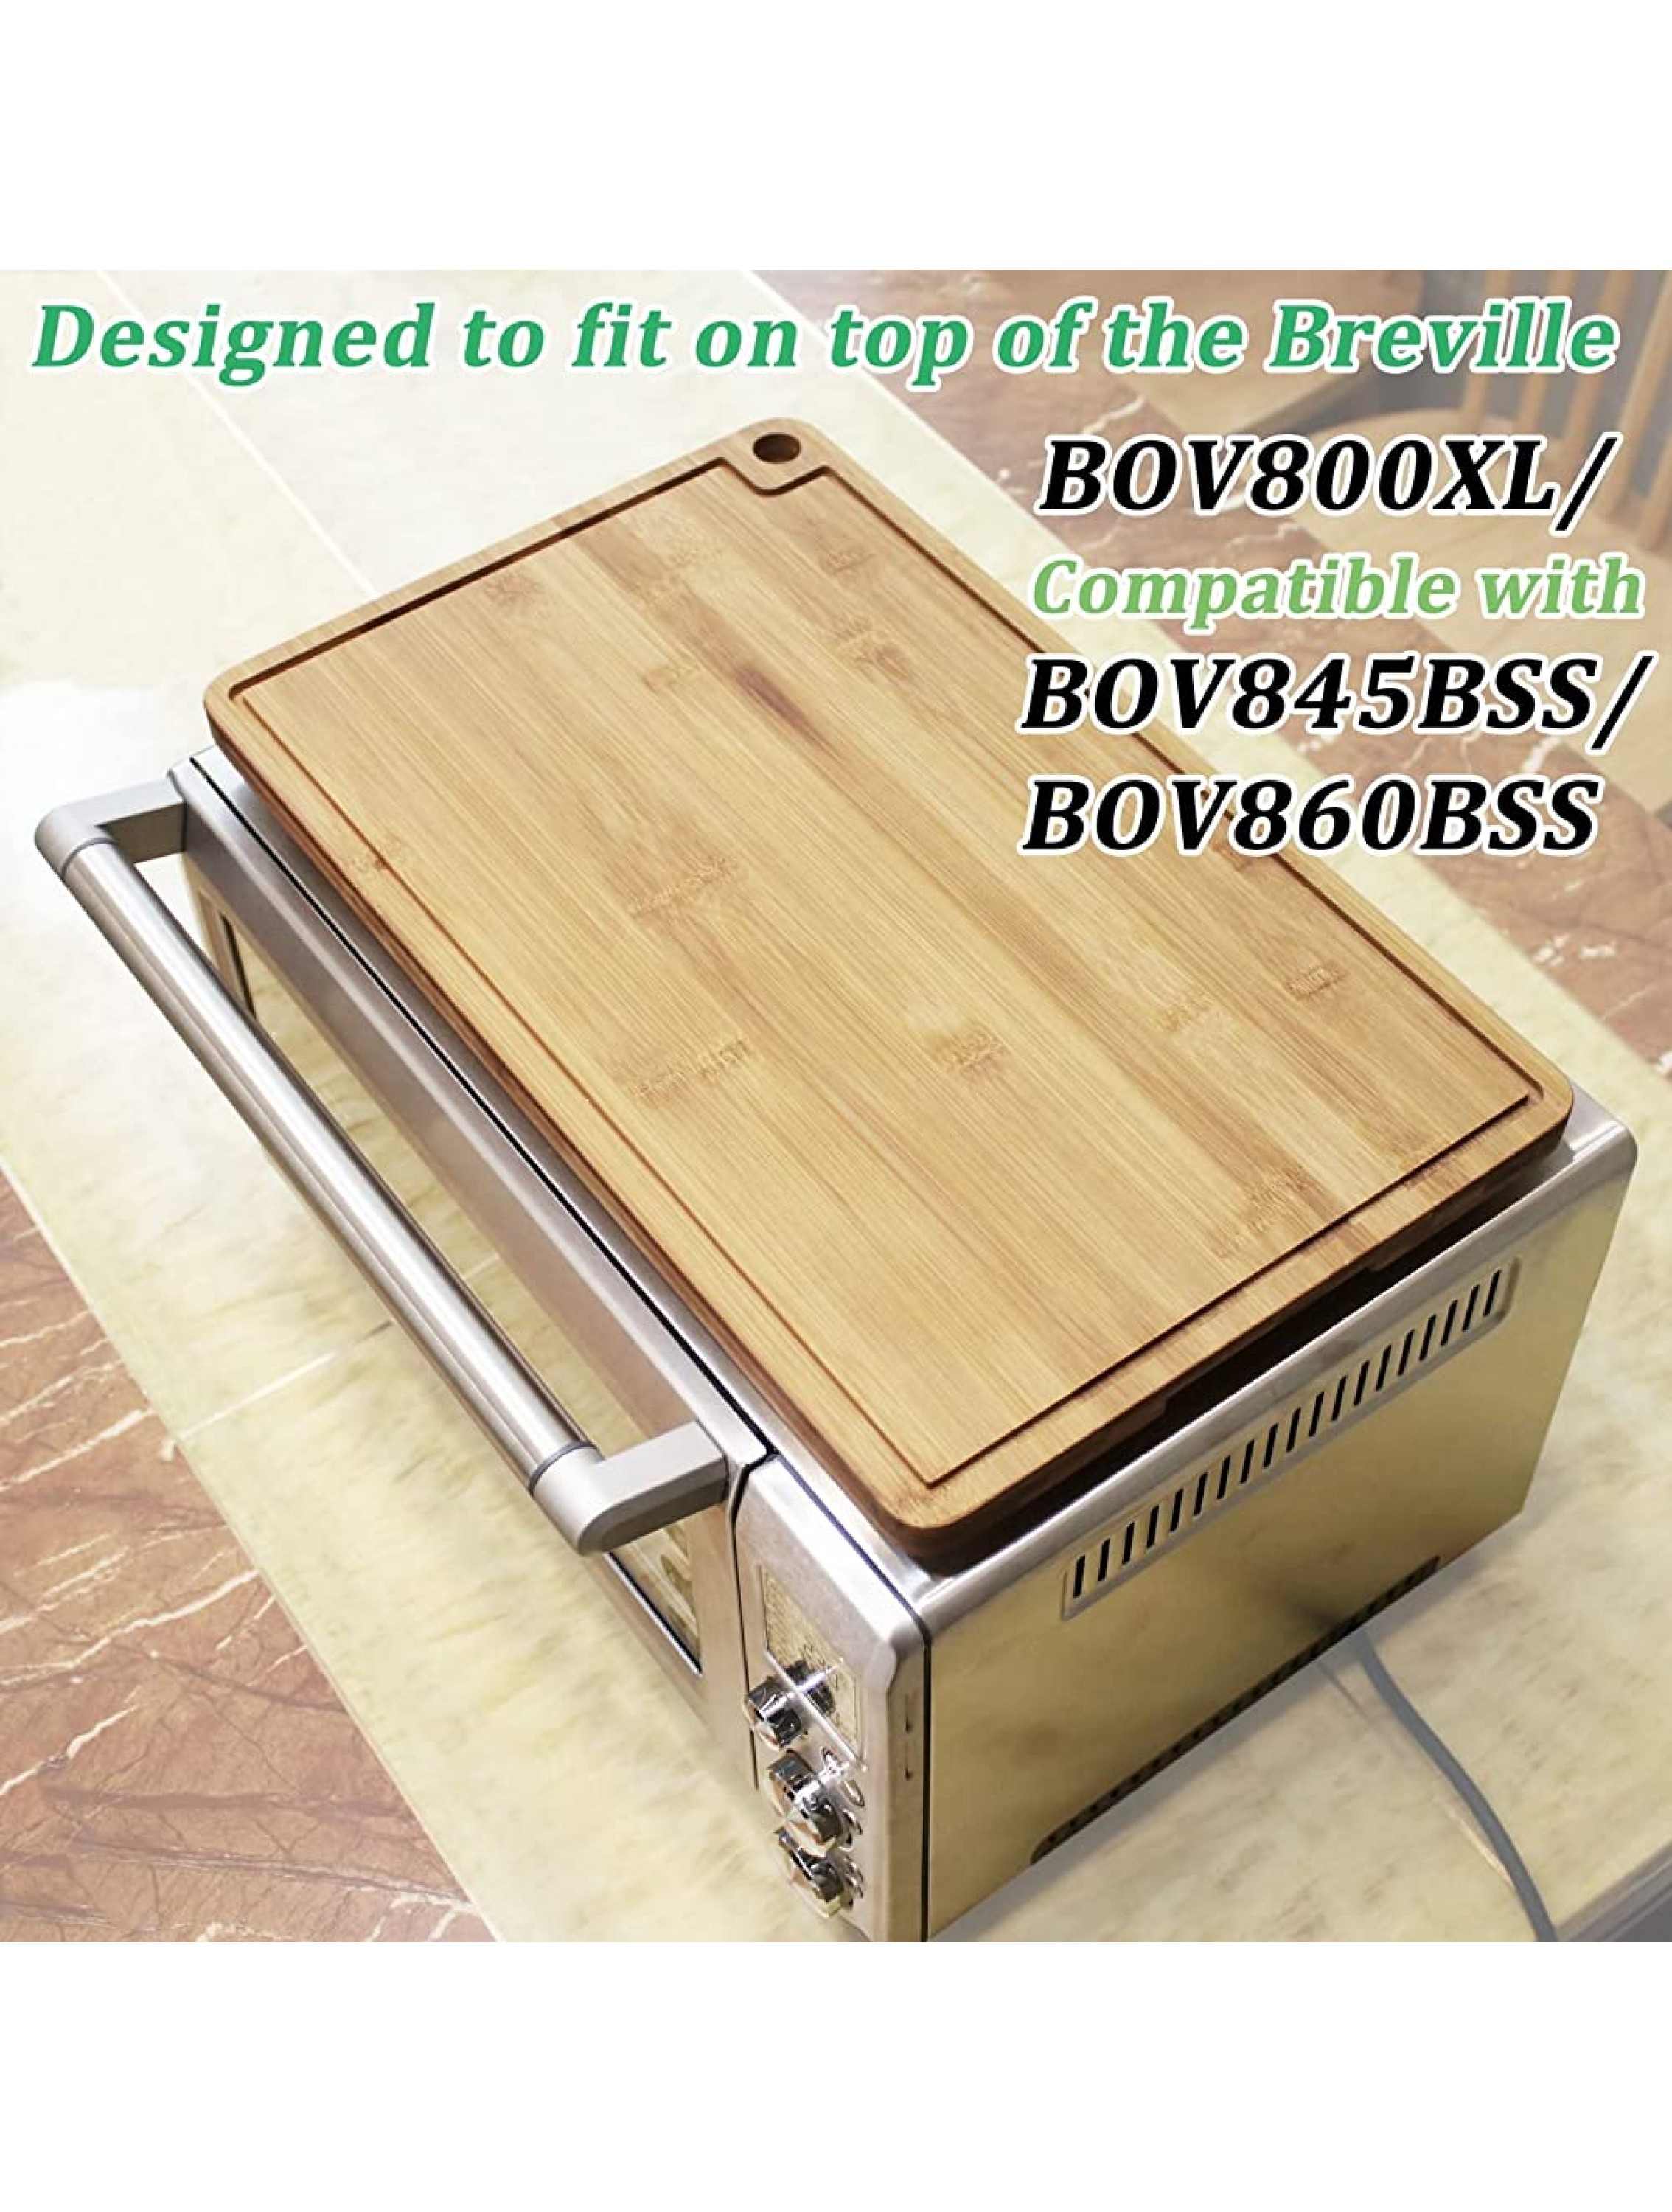 Ansoon Bamboo Wood Cutting Board for Toaster Smart Oven Air Compatible for Breville 860BSS 845BSS BOV800XL With Heat Resistant Silicone Feet Creates Storage Space Protect Cabinets Oven -17.8x10.8 - BPDR5CRNP